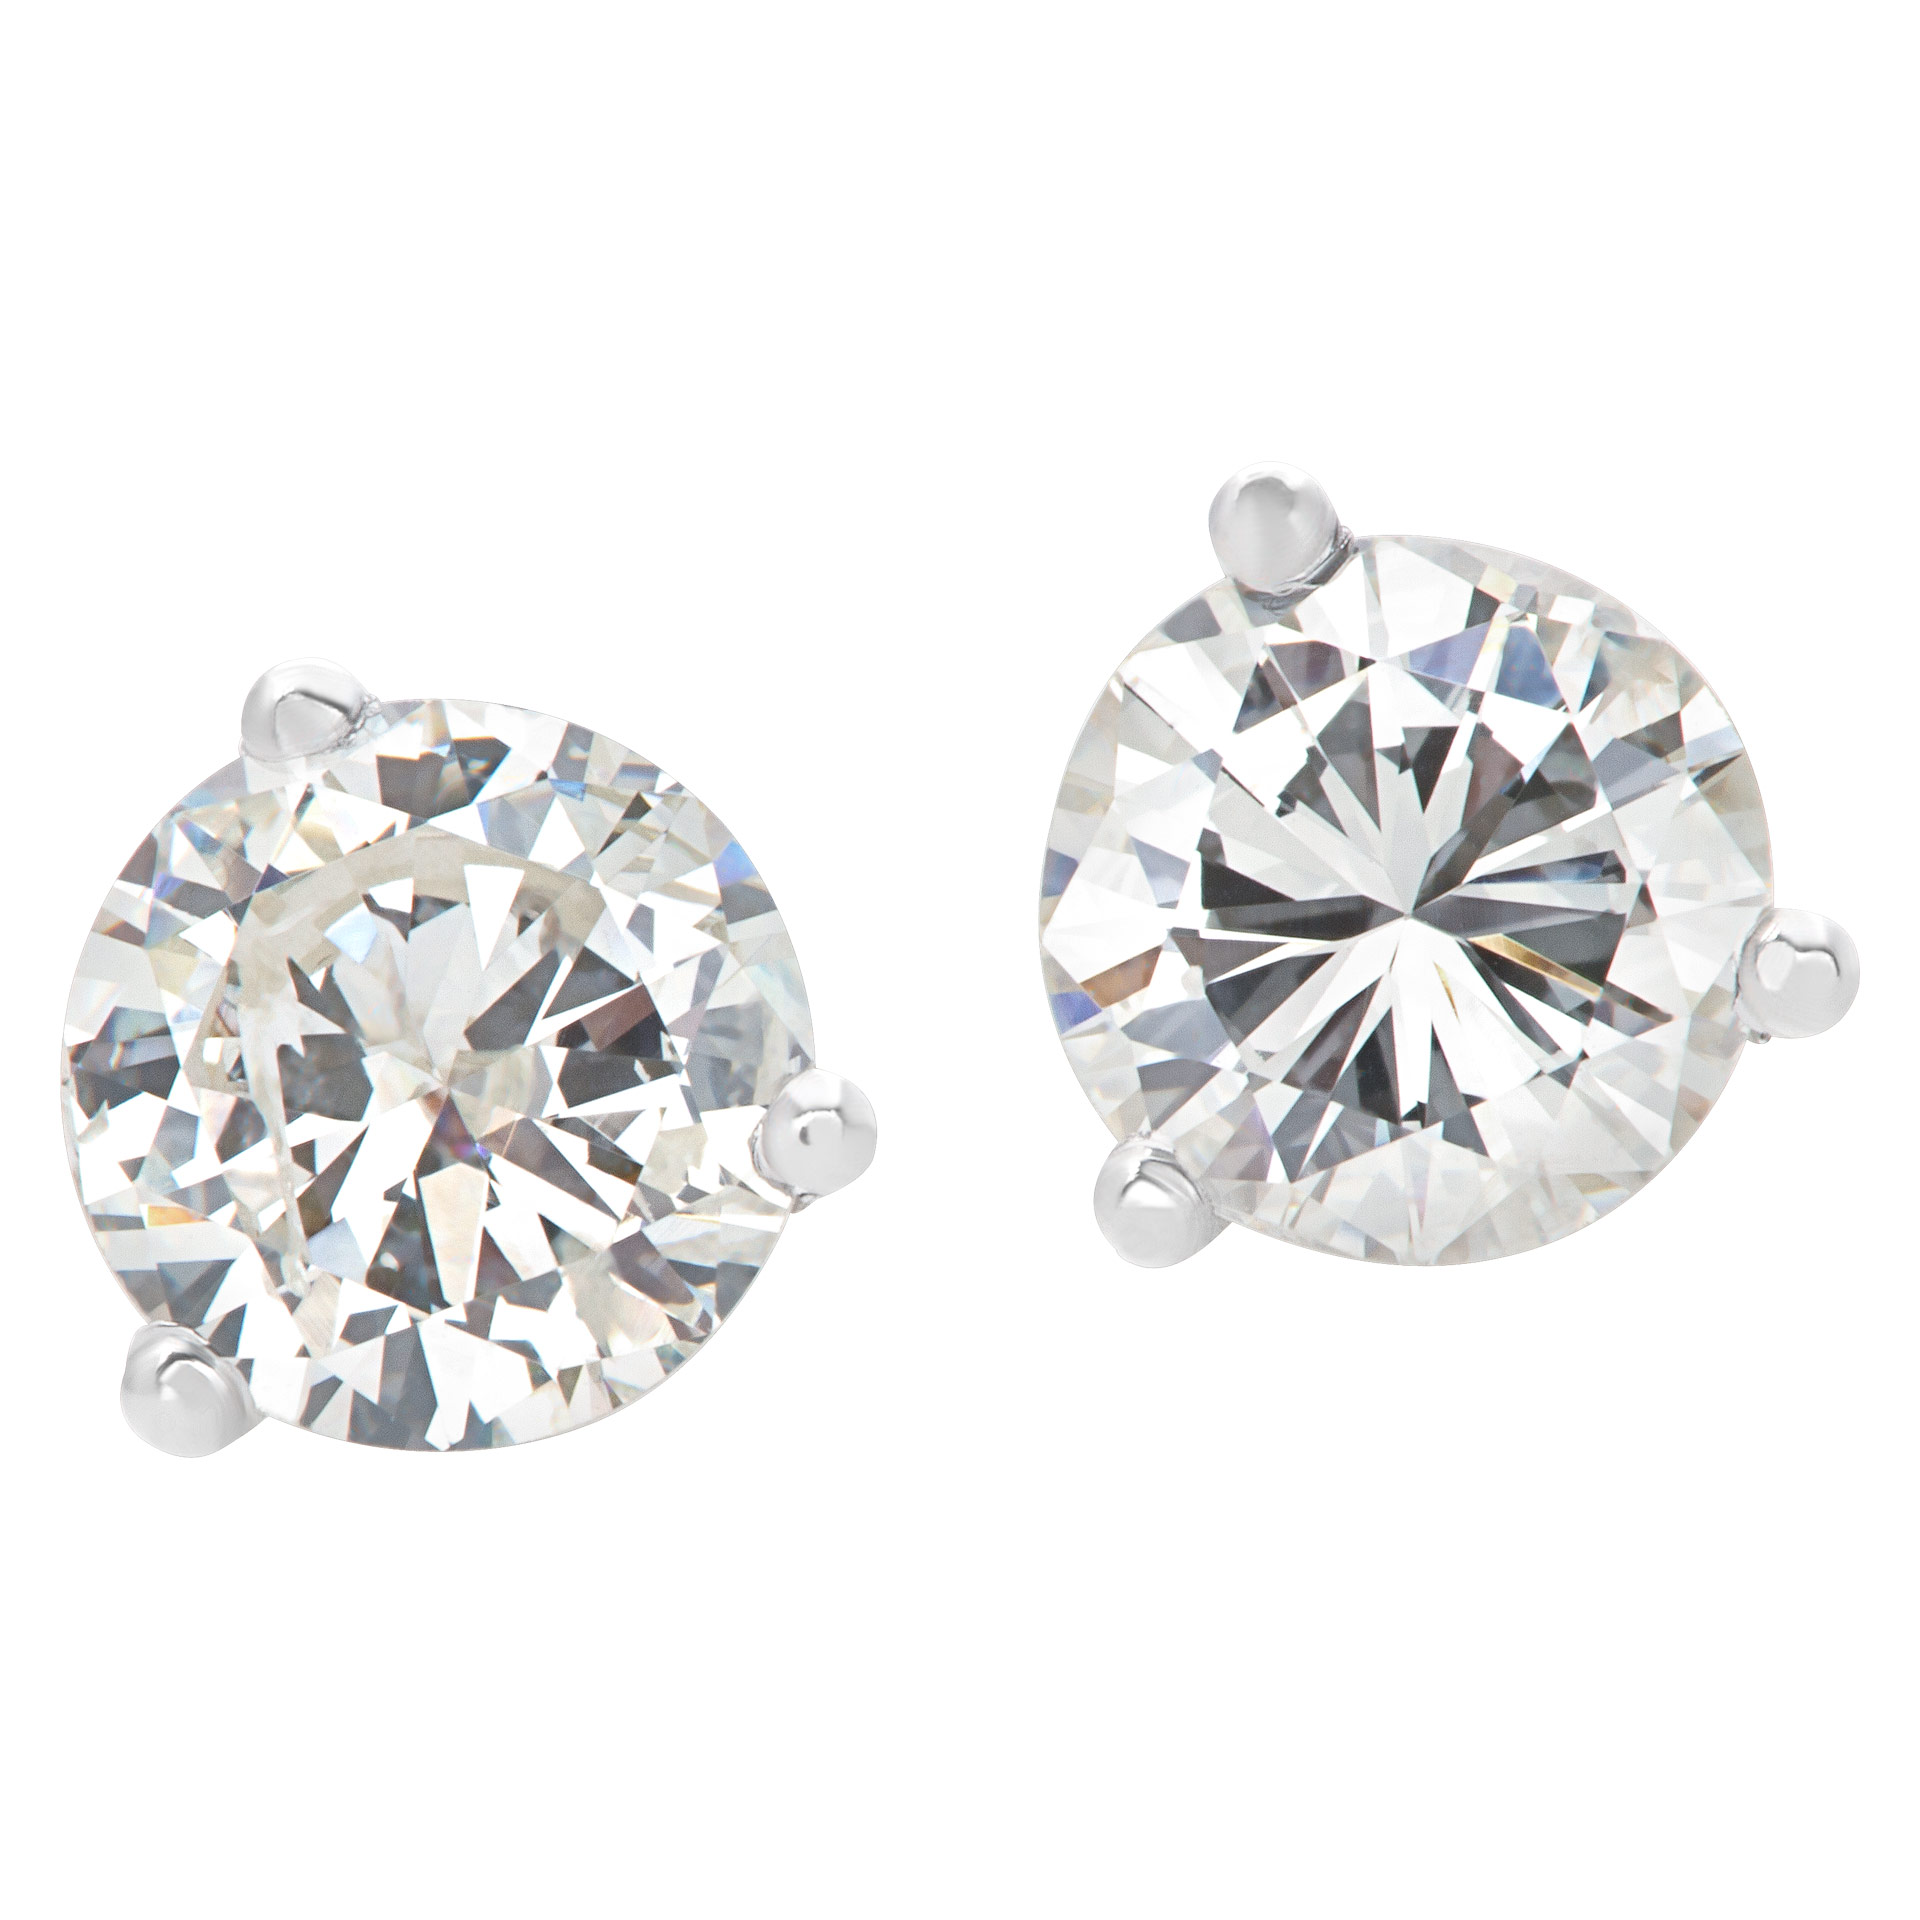 GIA certified diamond studs 0.49 carat (J color, I1 clarity) and 0.55 carat (L color, I2 clarity) image 1